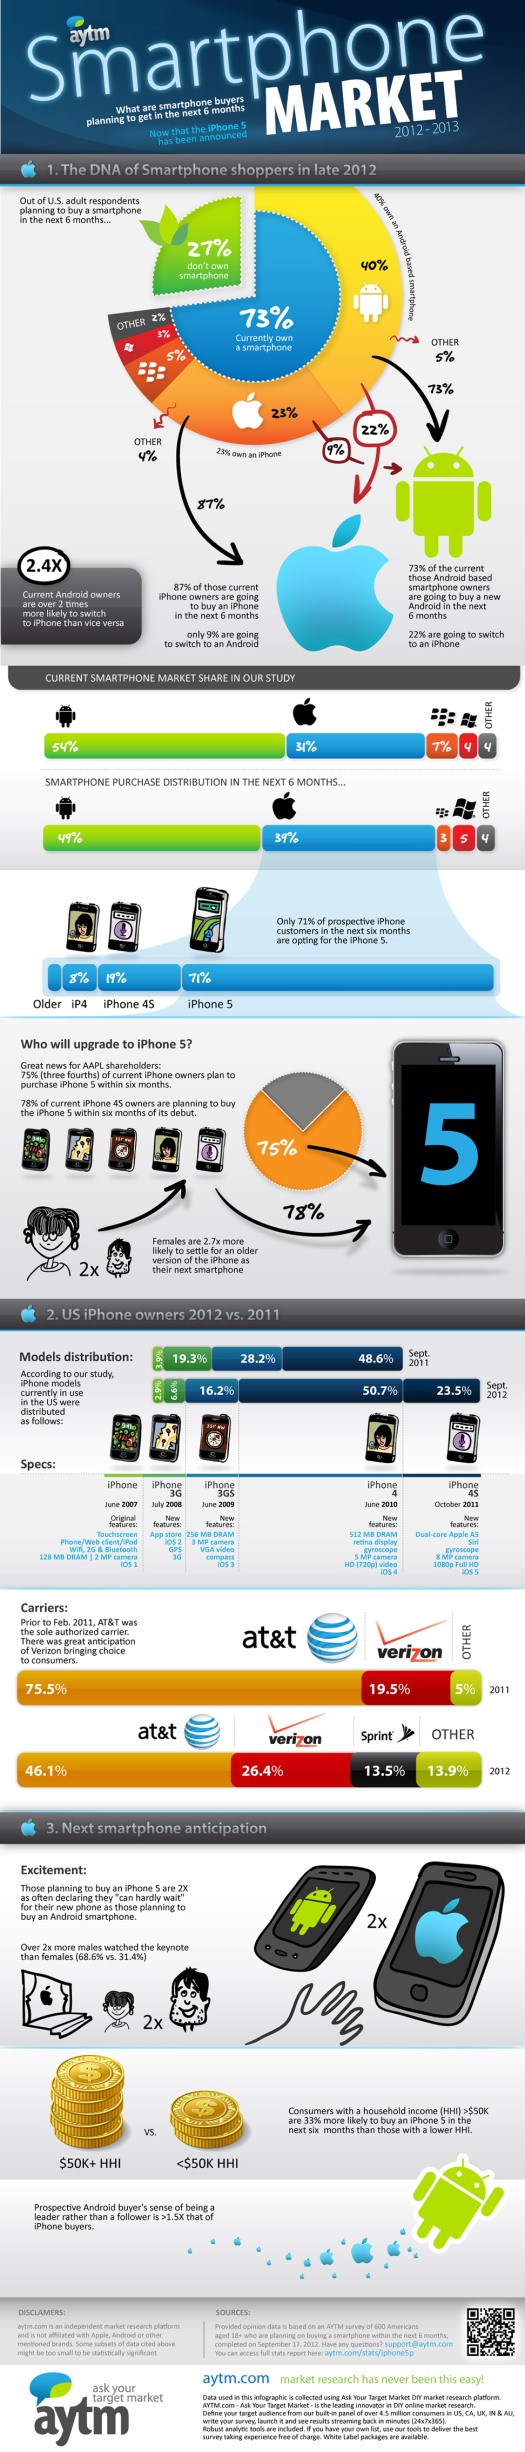 How the iPhone 5 Has Affected the Smartphone Market [INFOGRAPHIC]